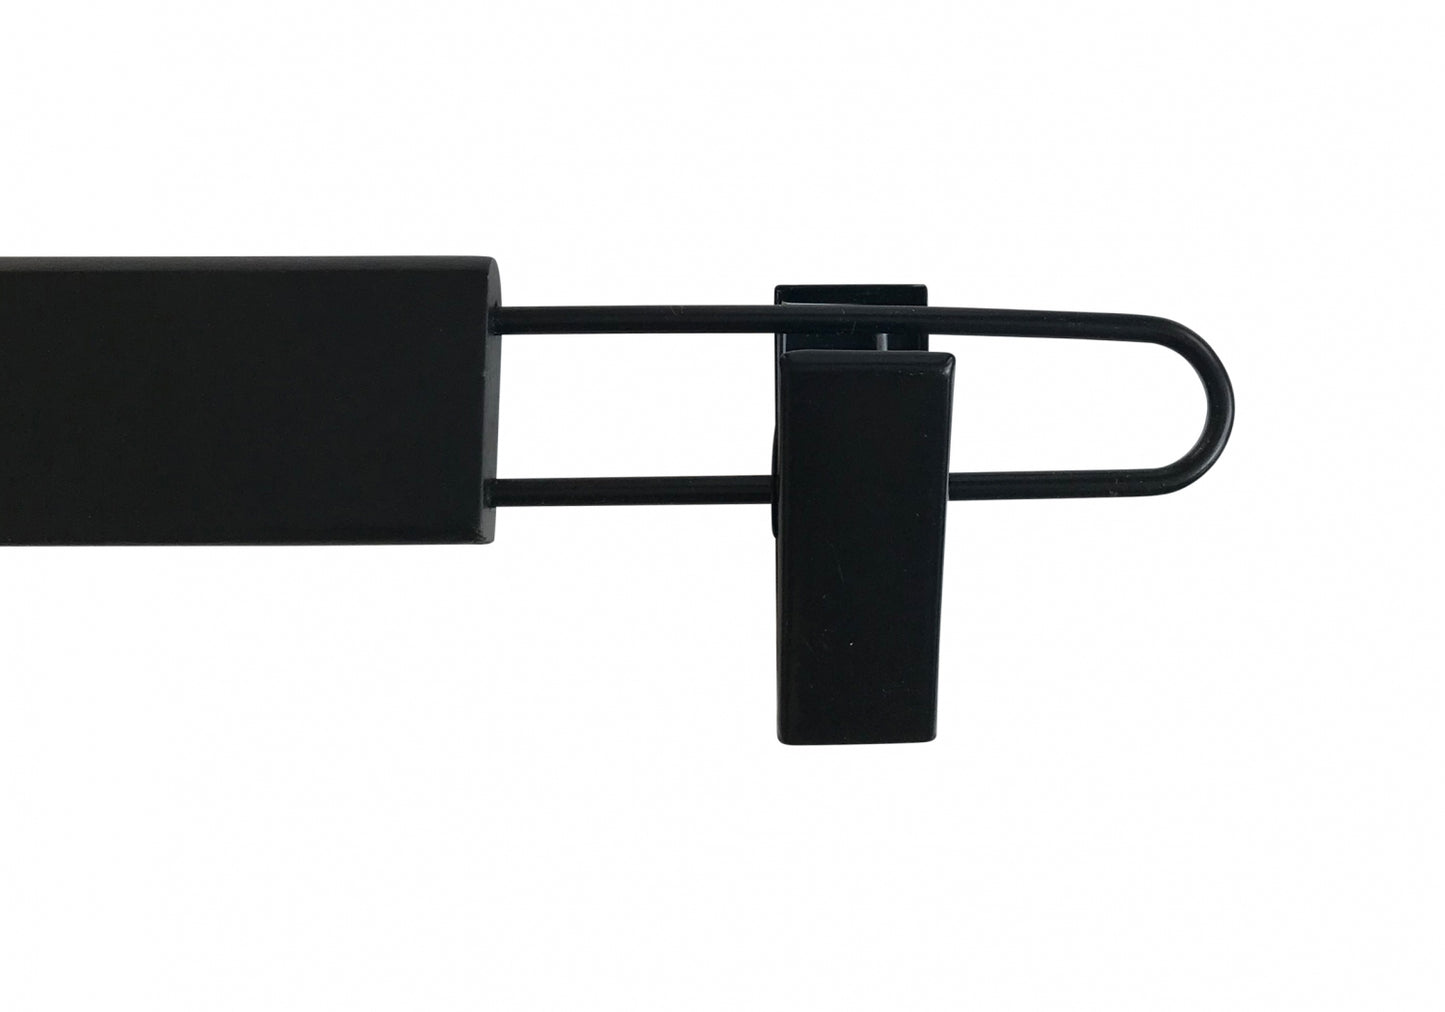 A Black Wooden Clip Bottom Hanger 37cm by Hangers of London on a white background. The hanger extends outward from the main body, a rectangular block, and curves back inward at the end. A small sturdy clip is attached near the curved end. The design allows for versatile use with 360-degree rotation capabilities.